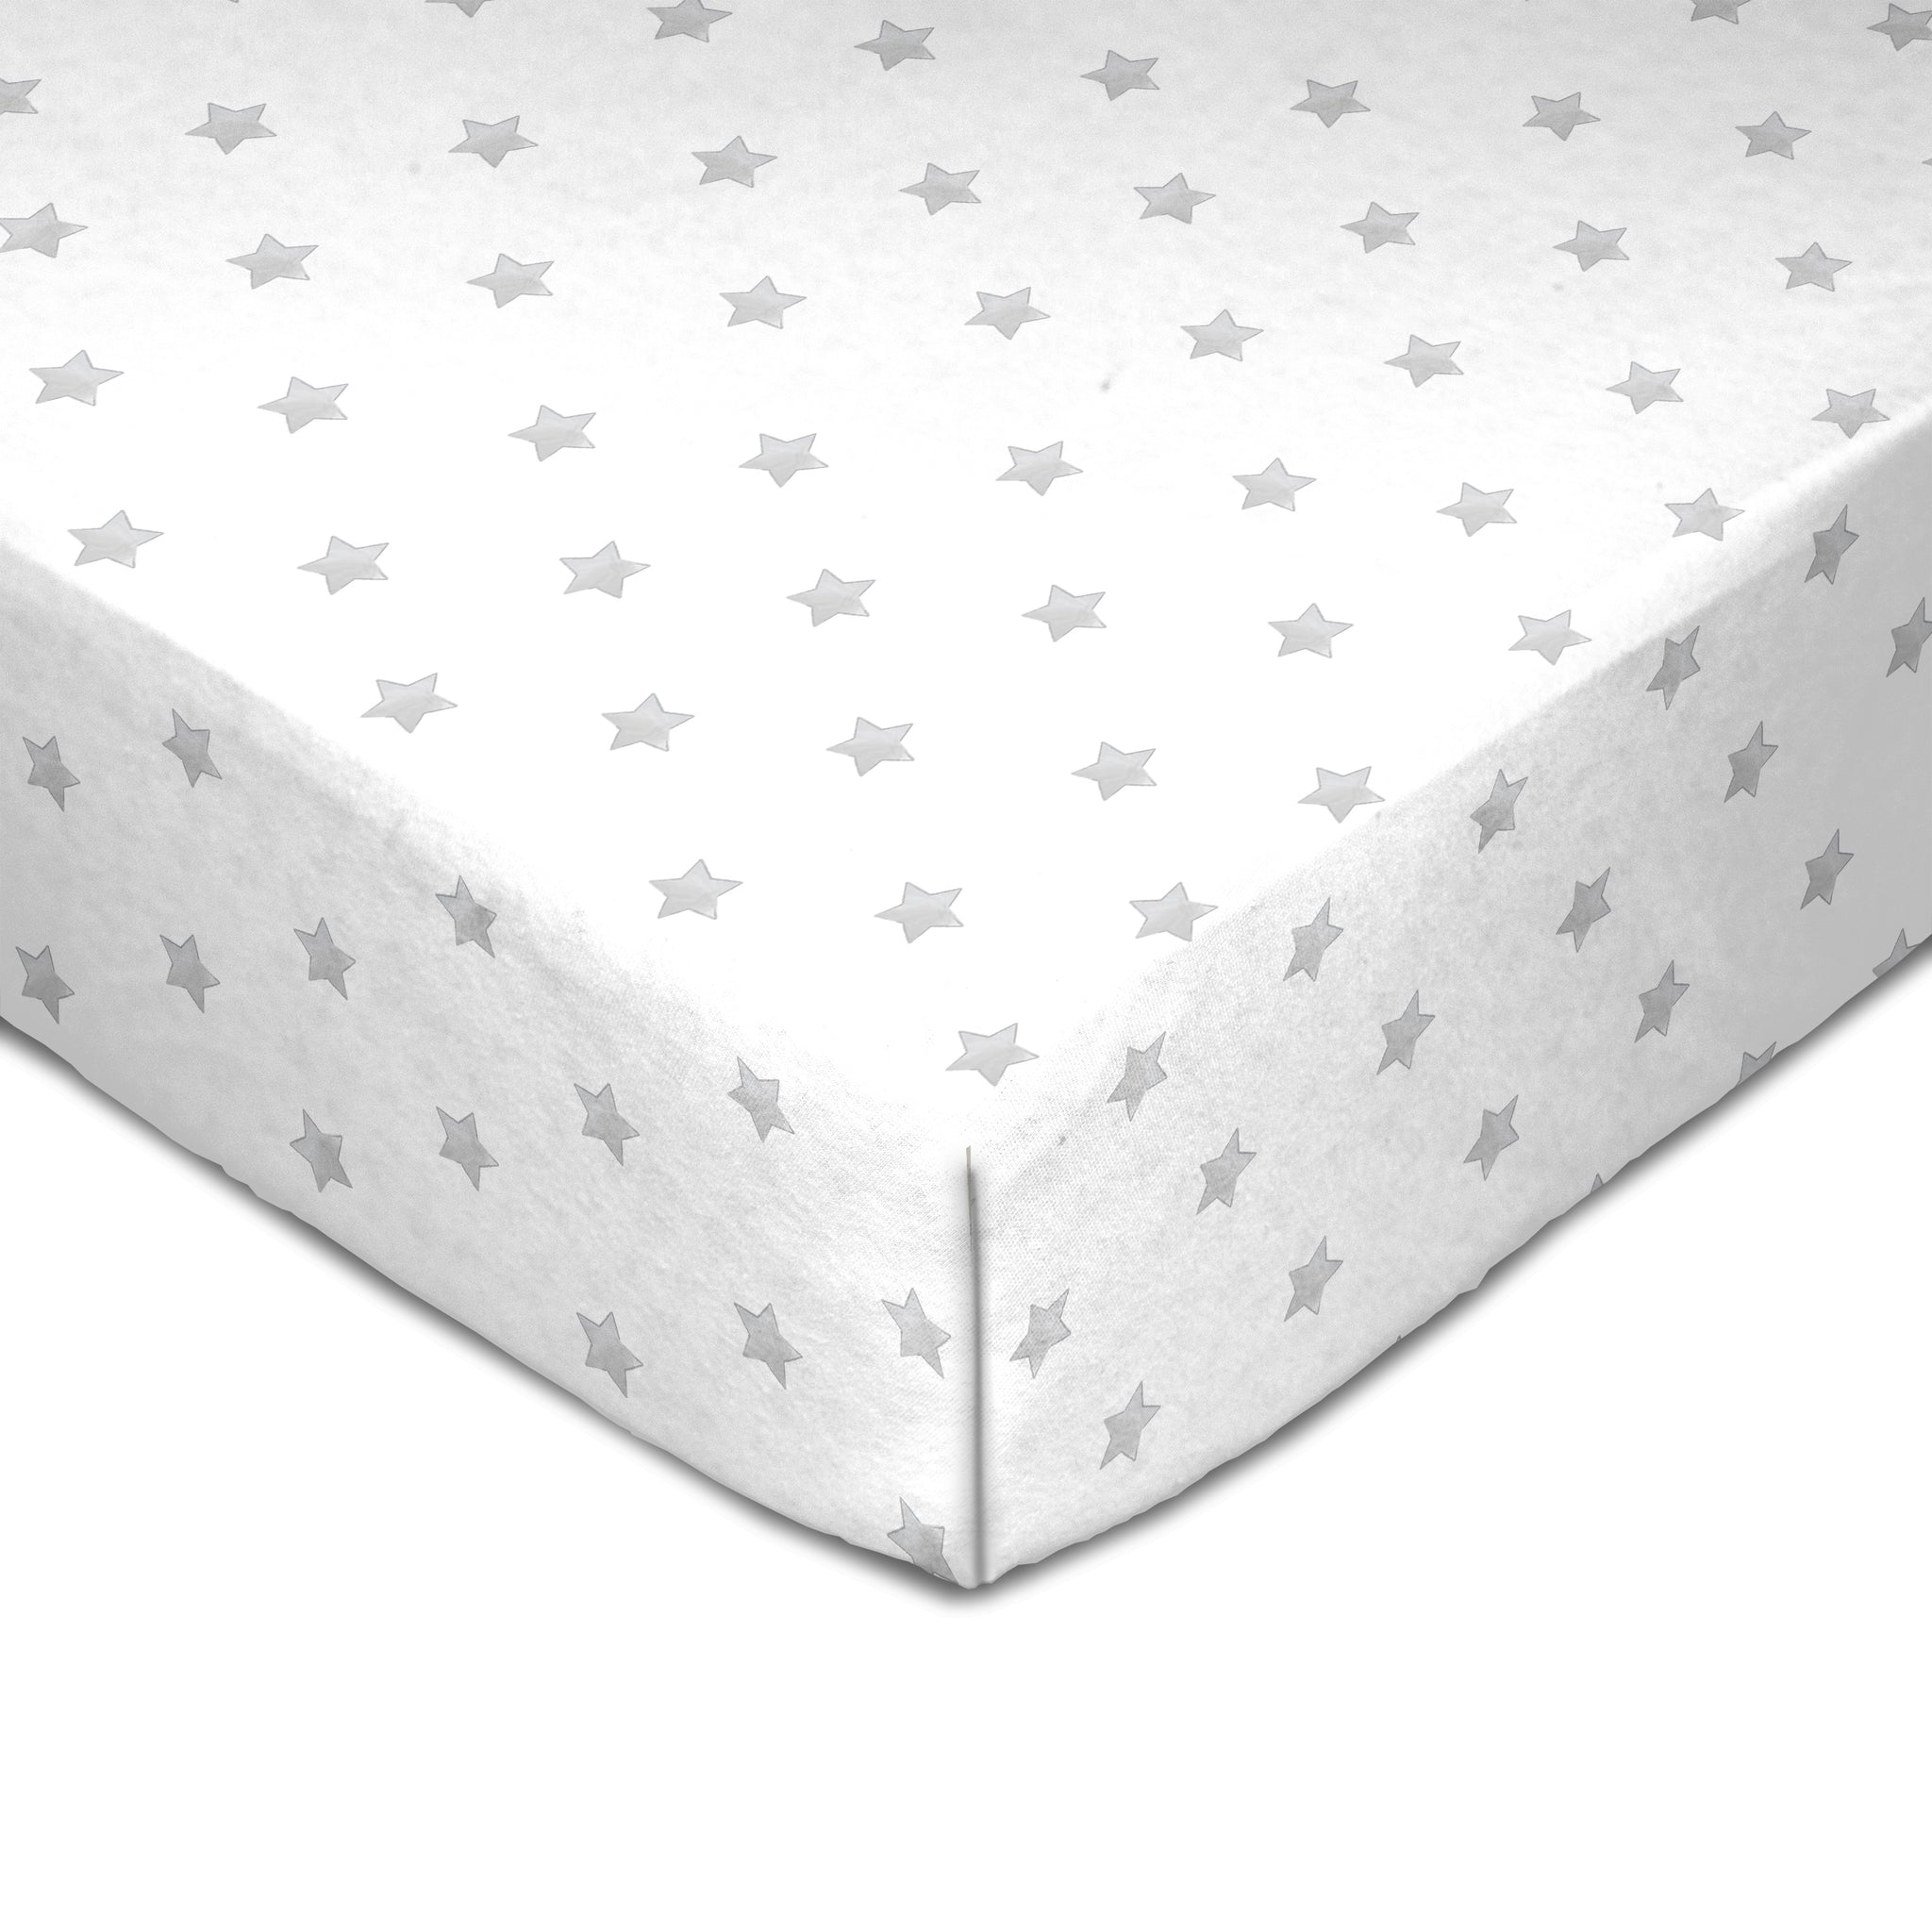 grey cot bed fitted sheet